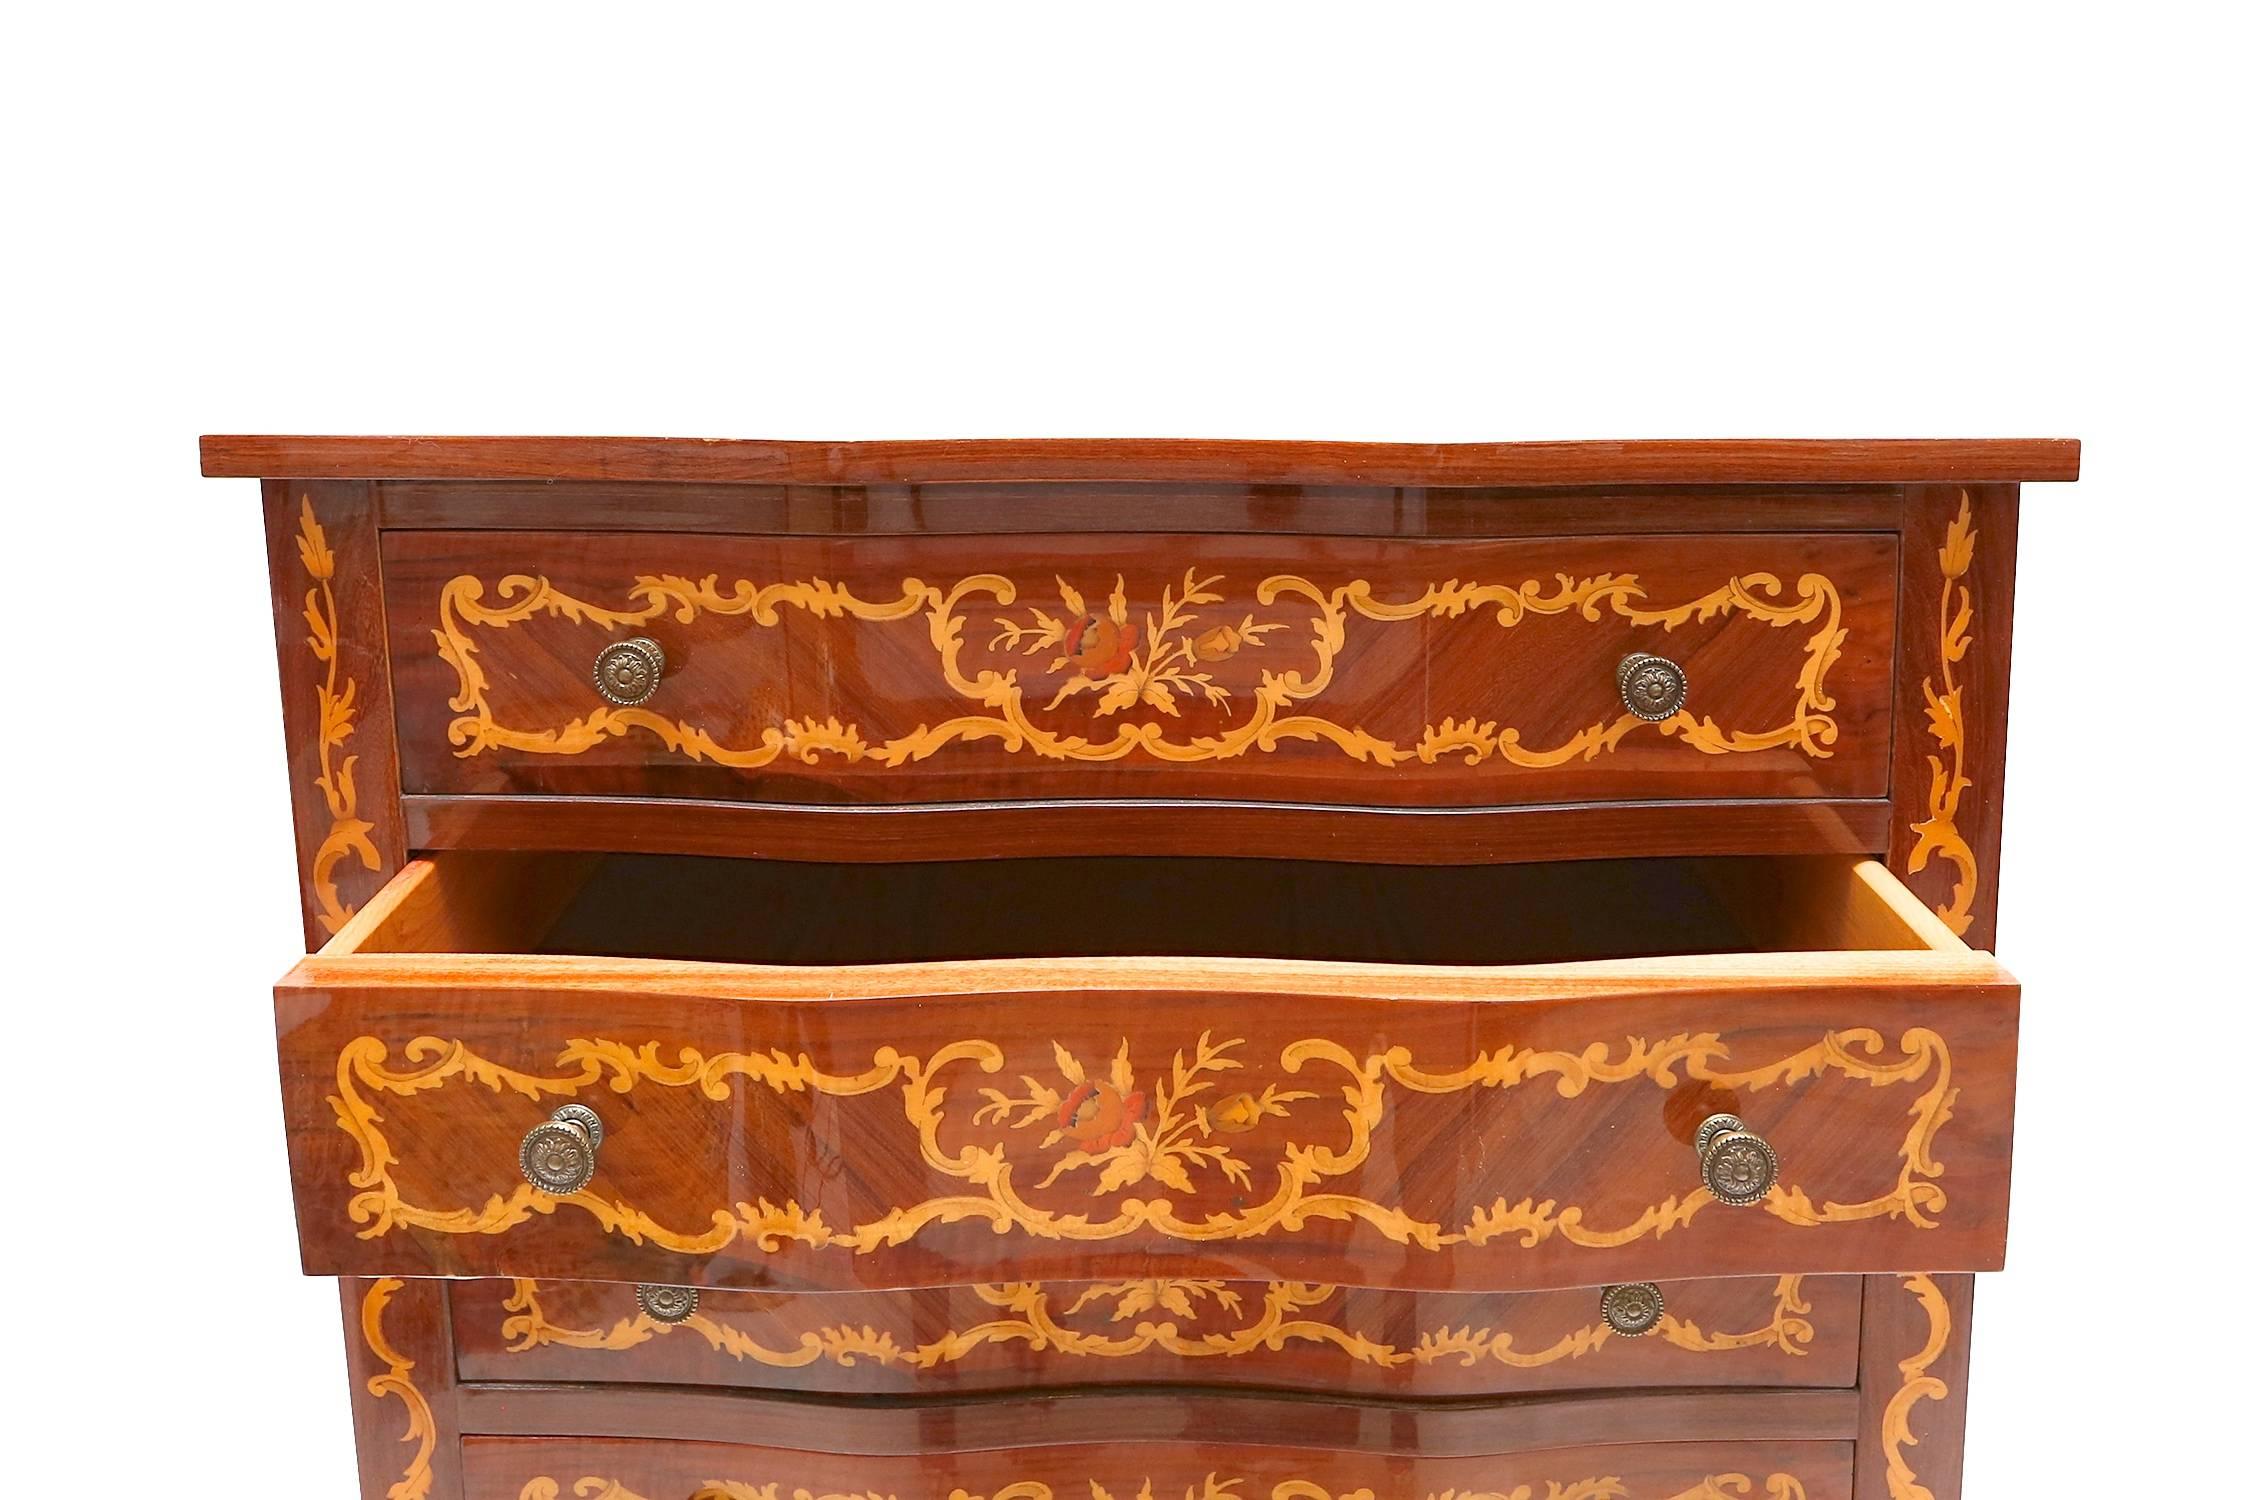 Decorative tall drawer chest Regency Louis XV style.
Leaf scroll, floral inlay
comprising of seven drawers,
French, third quarter of the 20th century.
Measures: H 144 cm, D 42 cm, W 78 cm.